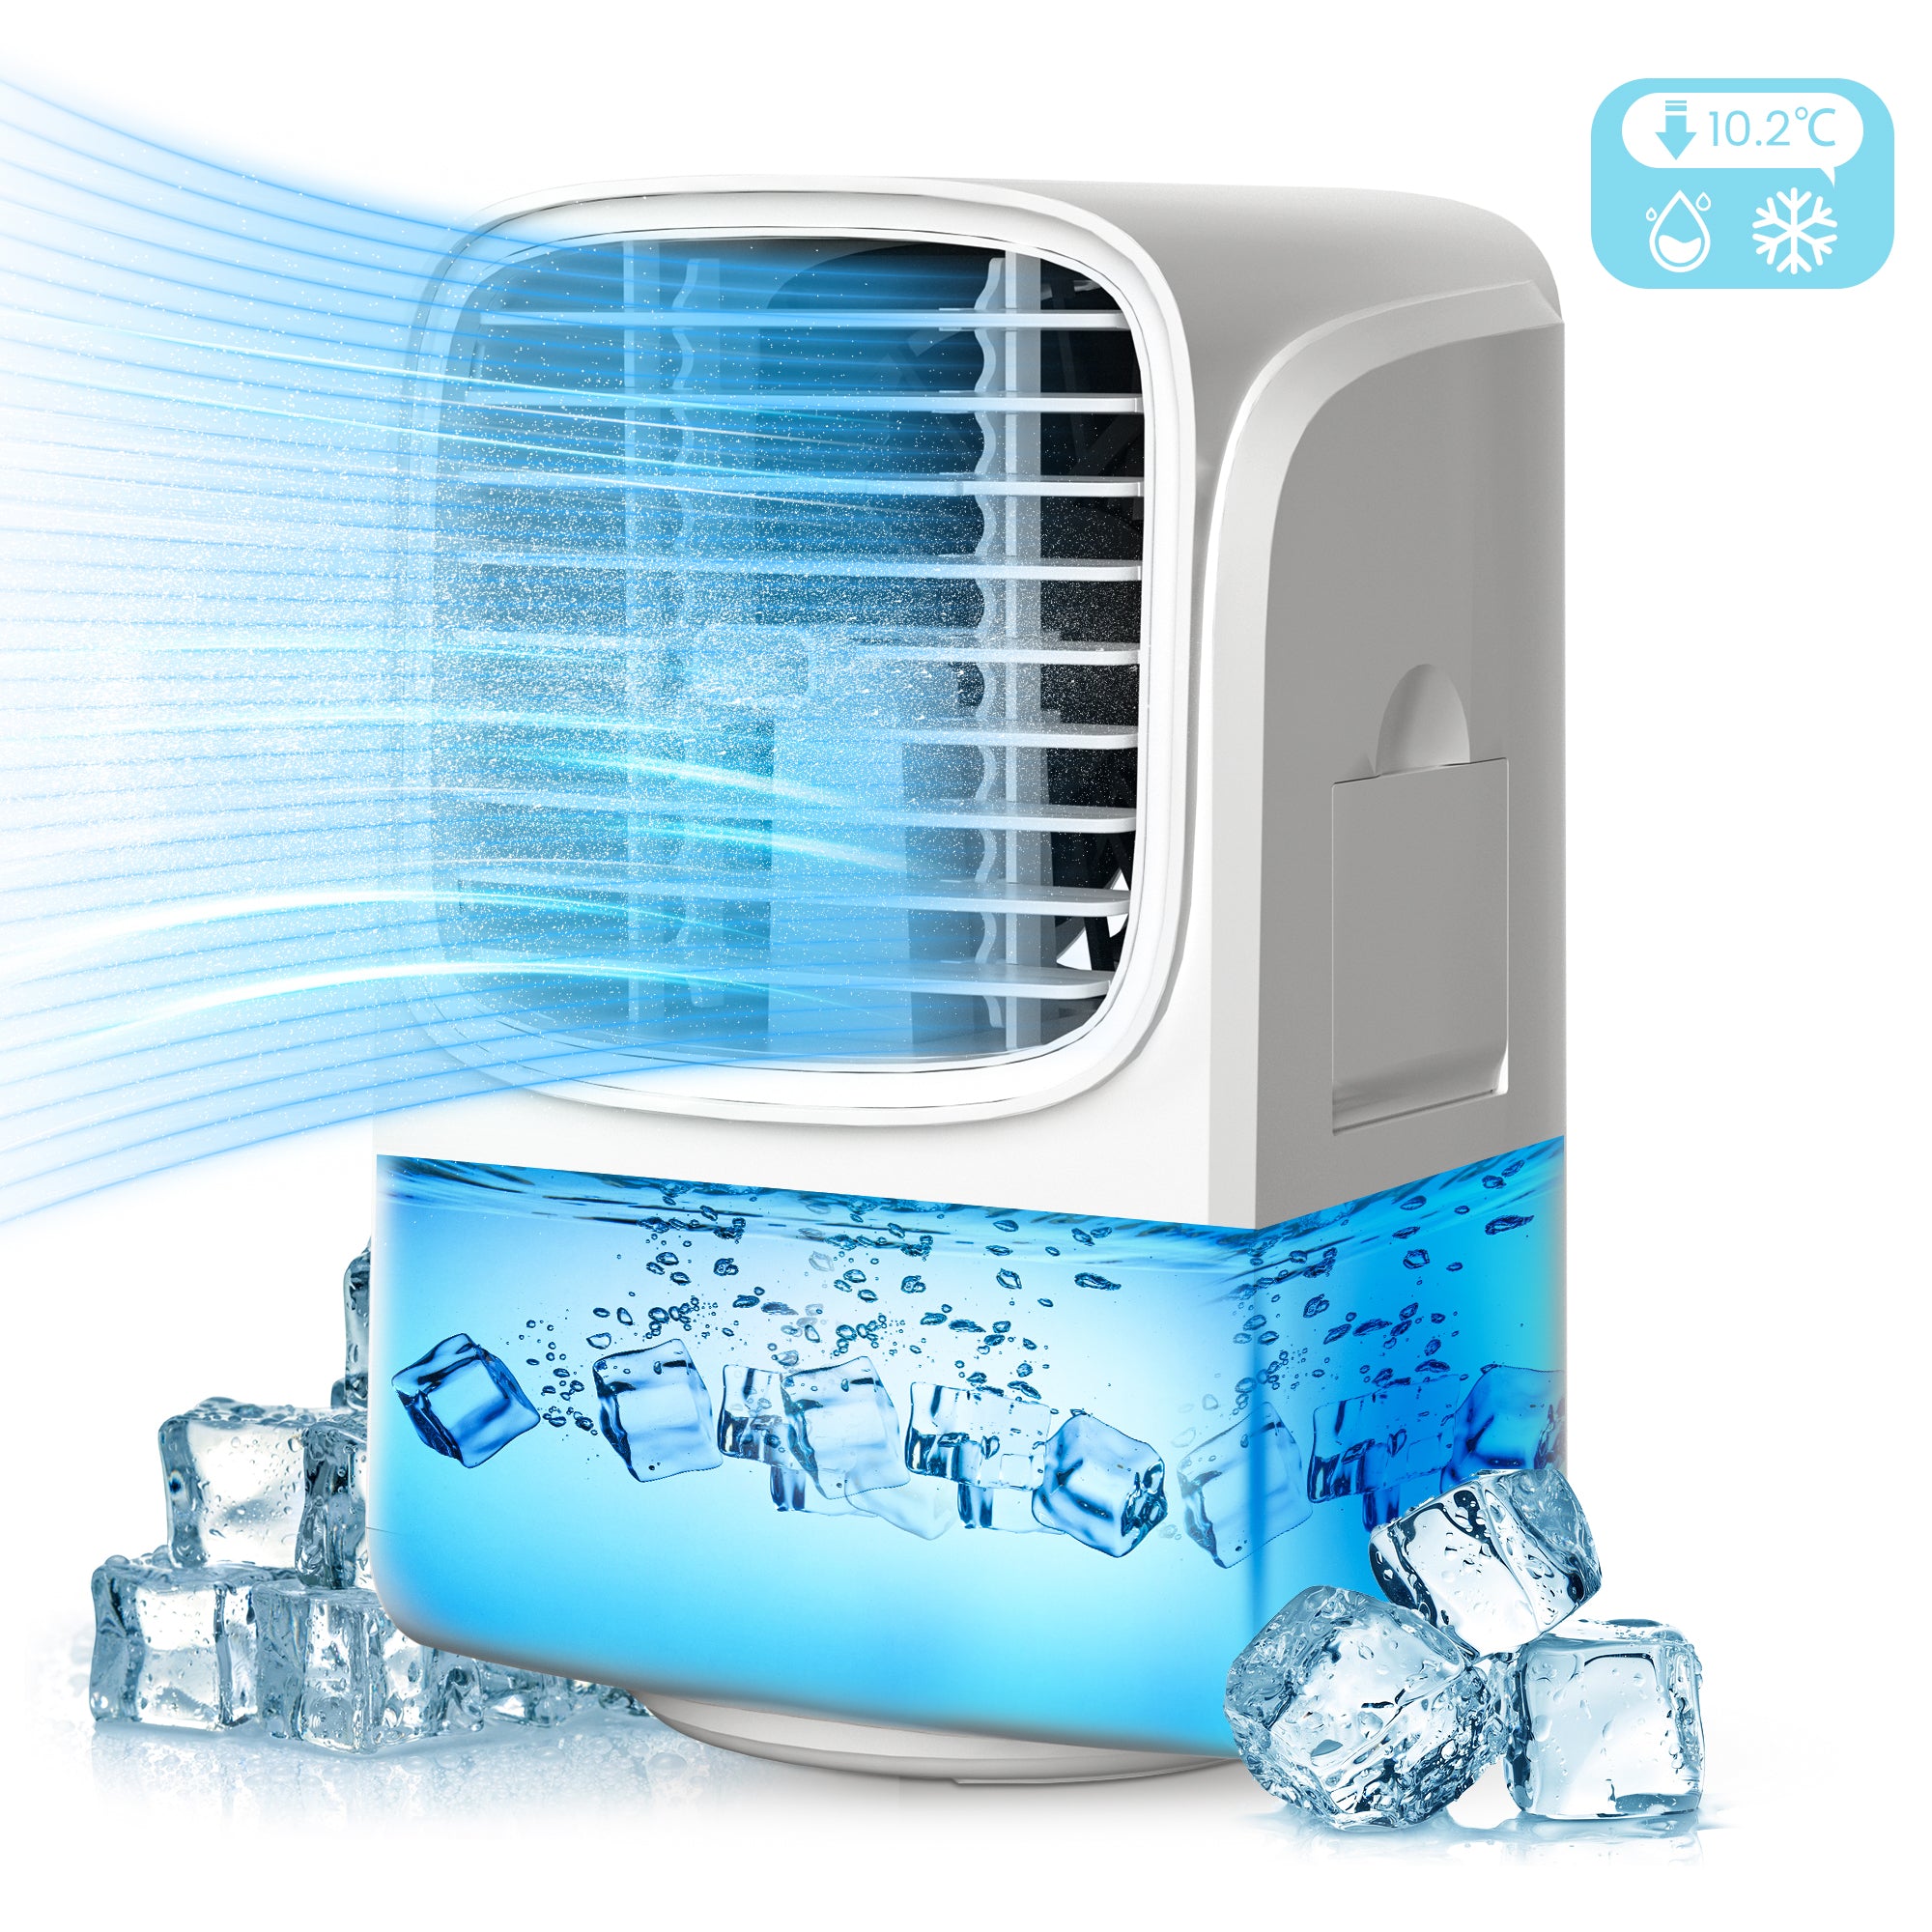 Portable Air Conditioner Fan Evaporative Personal Cooler Space Cooler Fan Quiet Desk Fan with USB Recharged